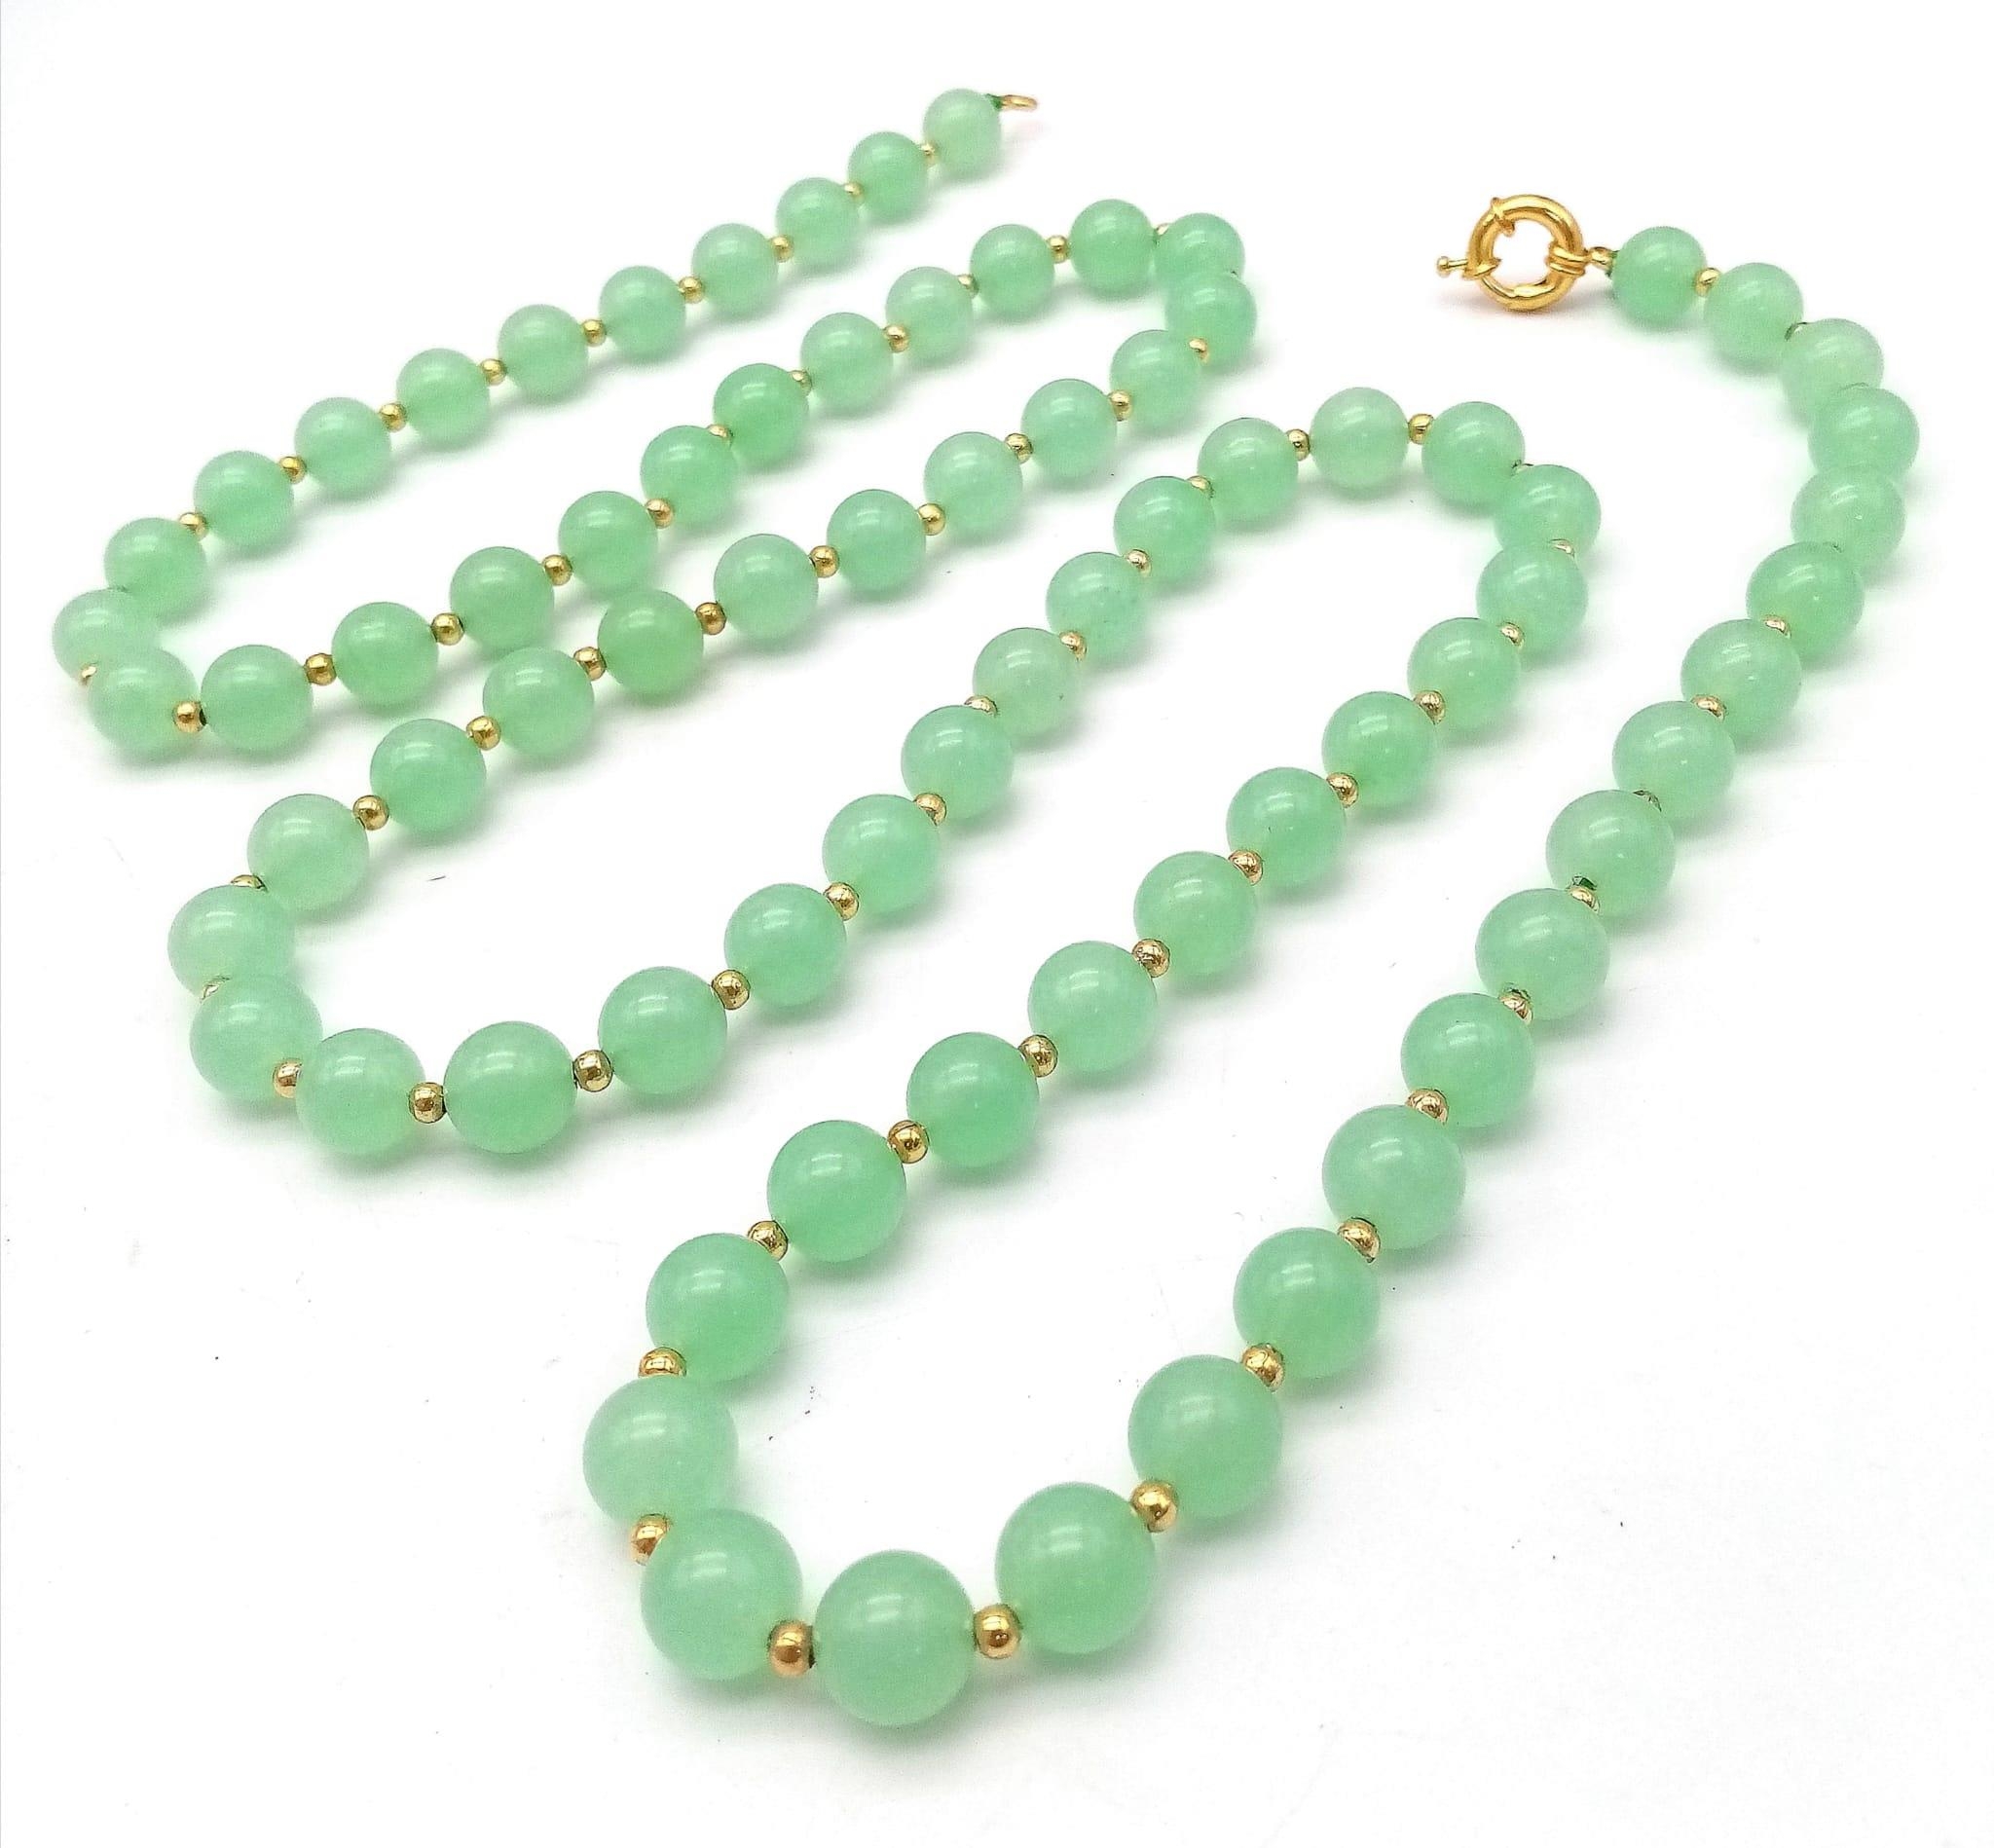 A Matinee Length Pale Green Jade Beaded Necklace. 10mm beads. Gilded spacers and clasp. 90cm - Image 2 of 2